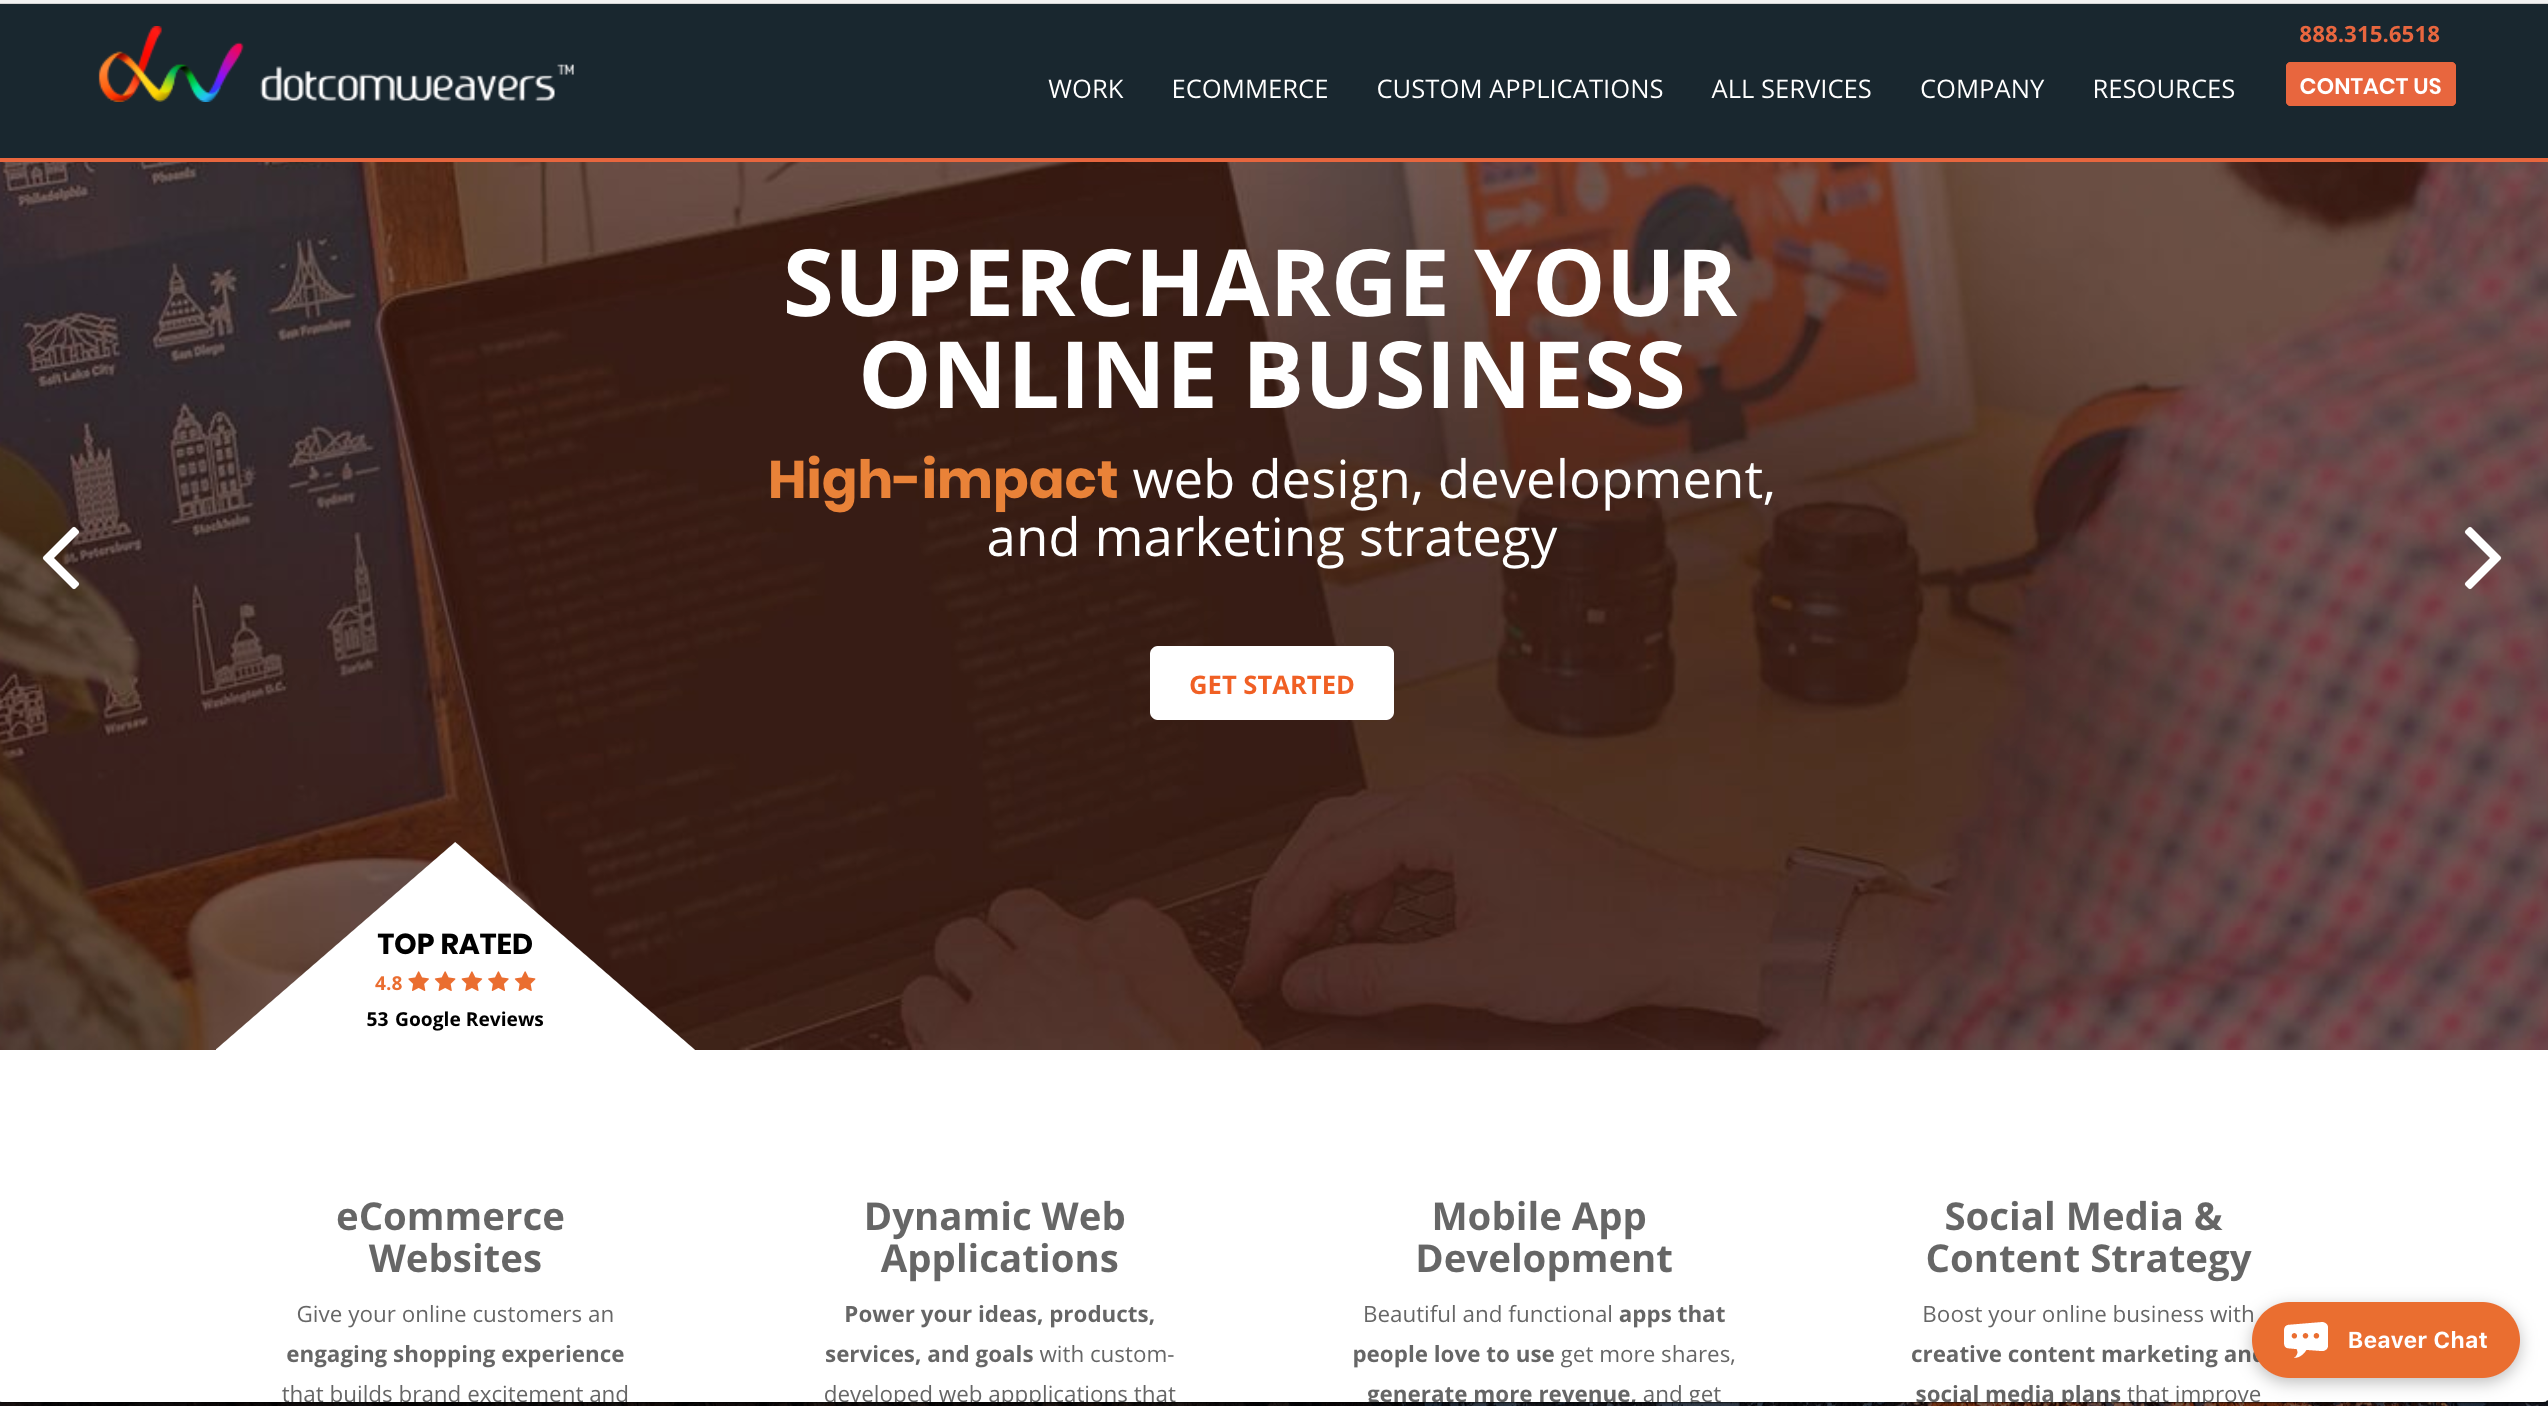 Home page of #3 Best eCommerce Website Design Firm: Dotcomweavers